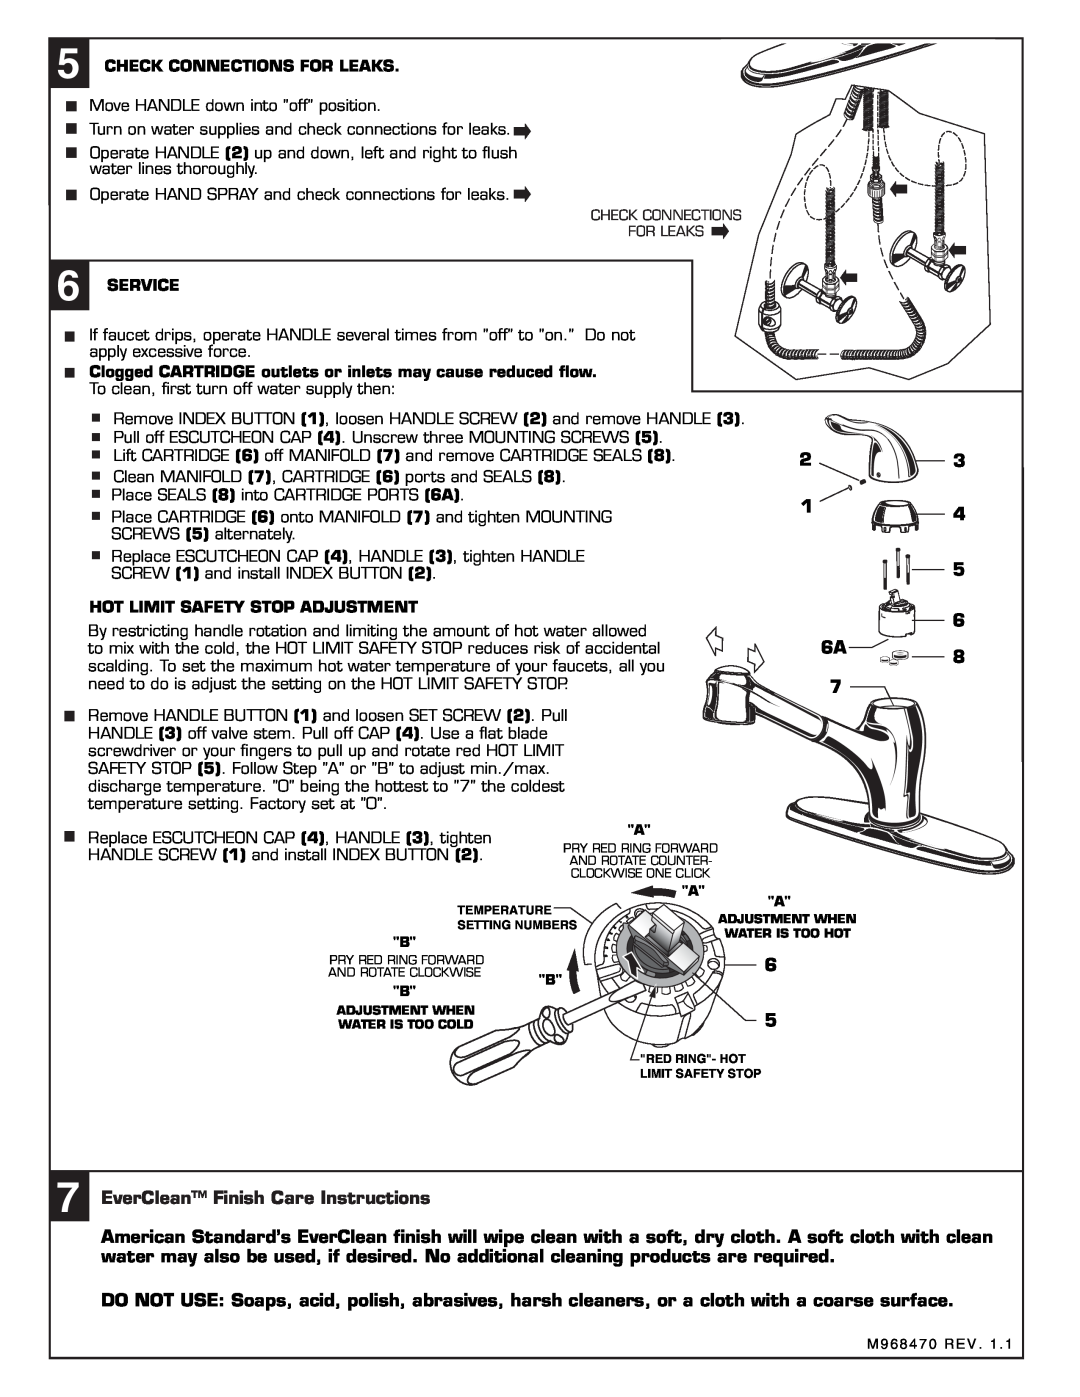 American Standard 4114.100 EverClean Finish Care Instructions,  Check Connections For Leaks,  Service, 23 1 5 6 6A8 